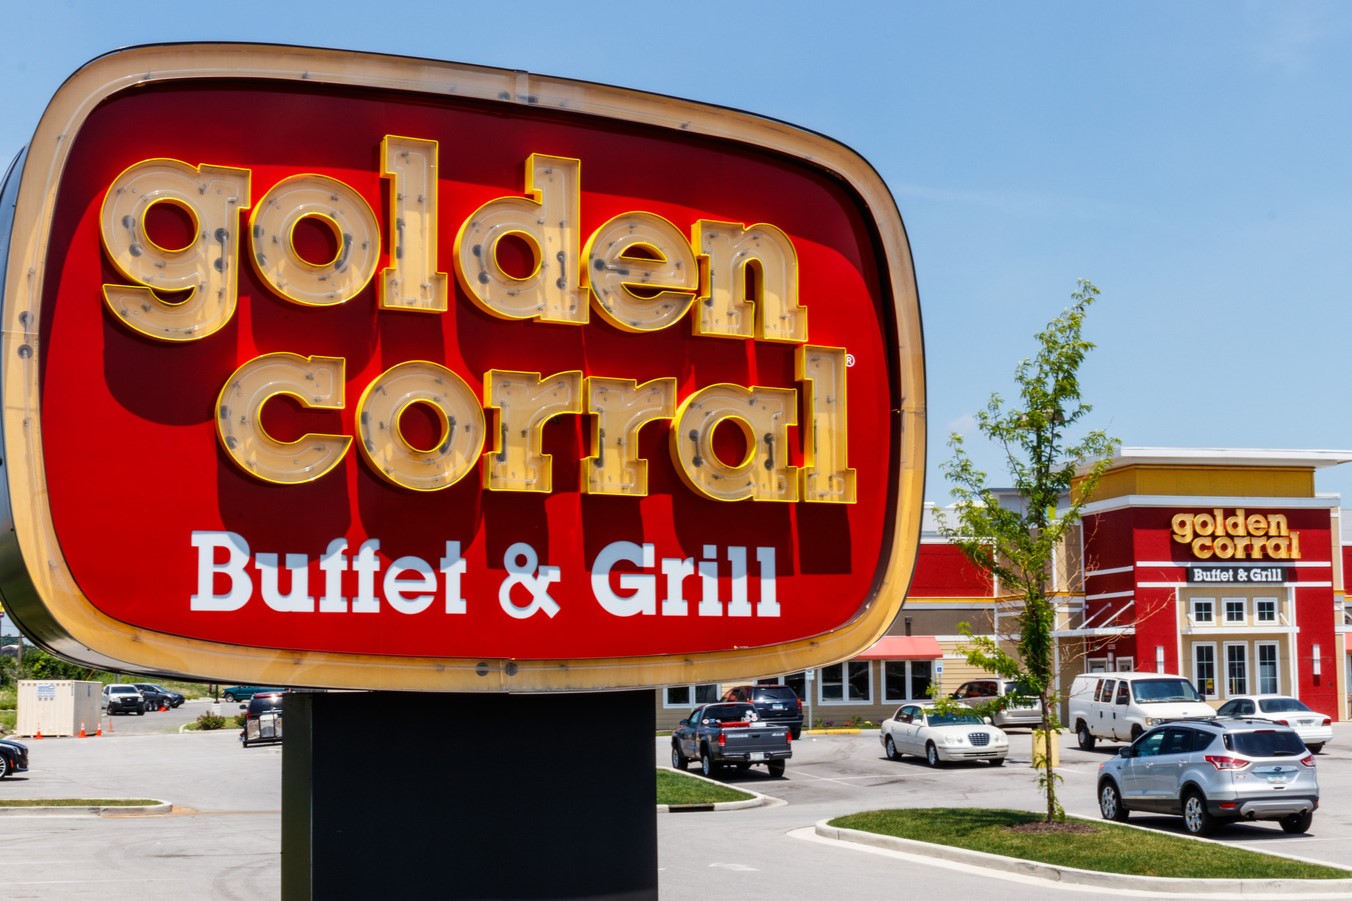 You Won’t Believe When Golden Corral Serves Lunch!